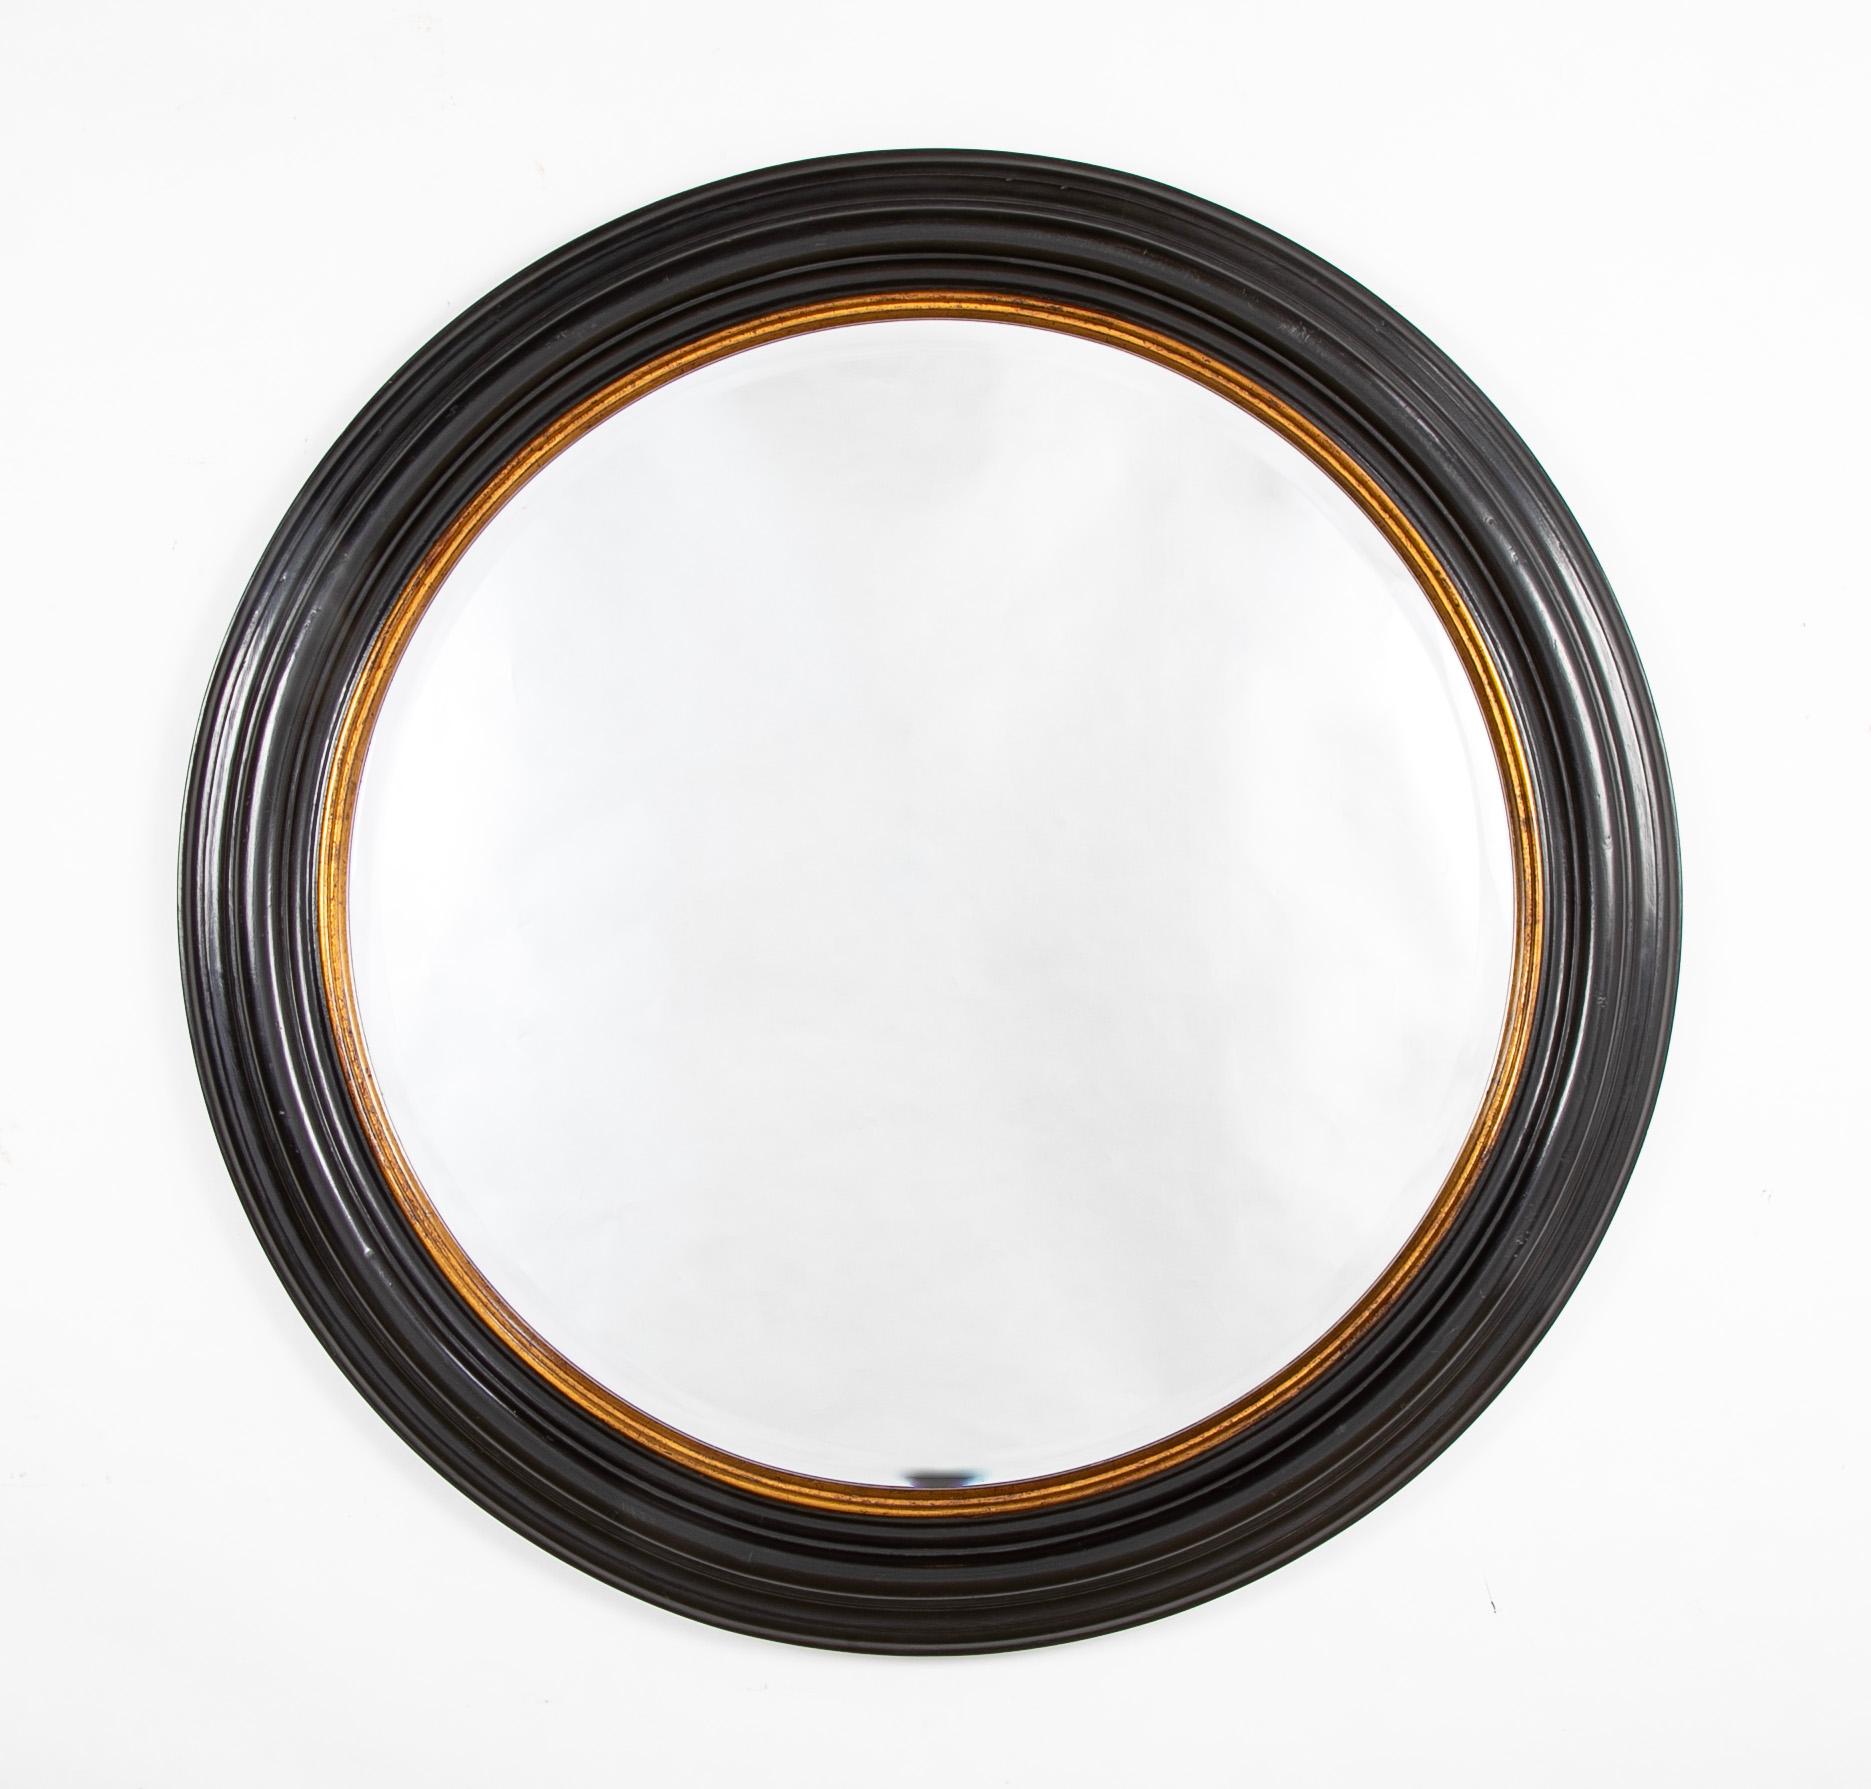 English Regency Black Lacquer And Gilt Round Mirror With Beveled Glass, Large Scale